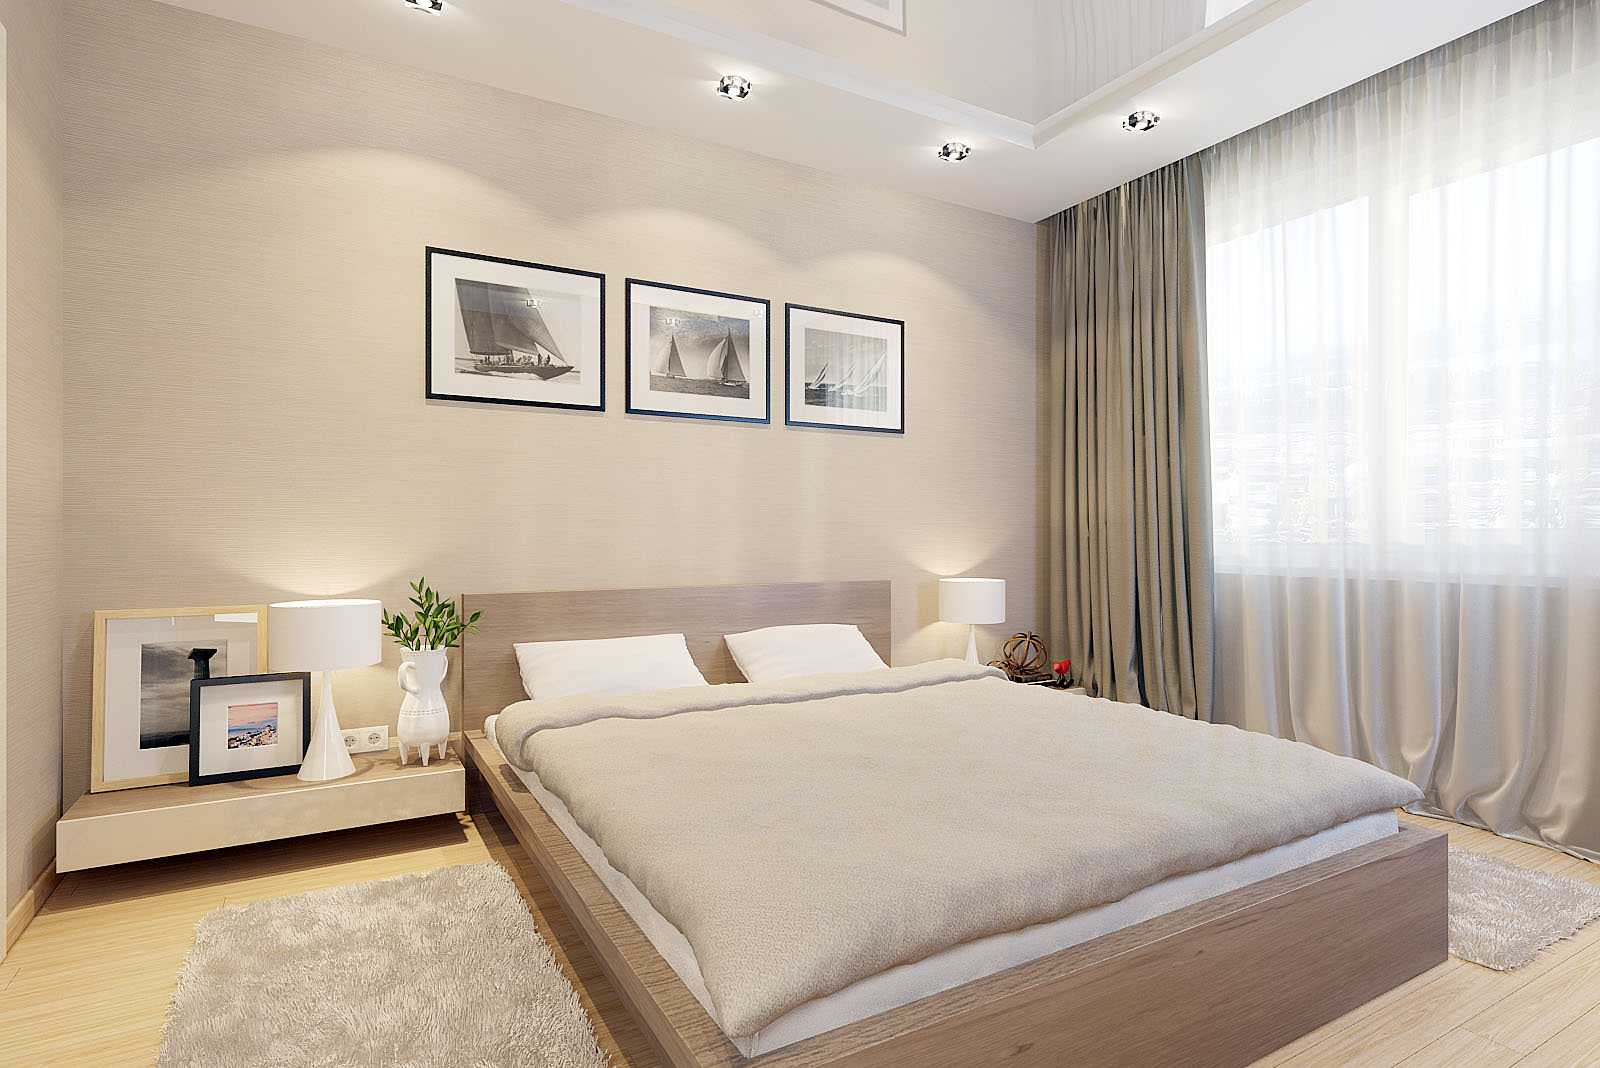 a combination of light colors in the style of the bedroom